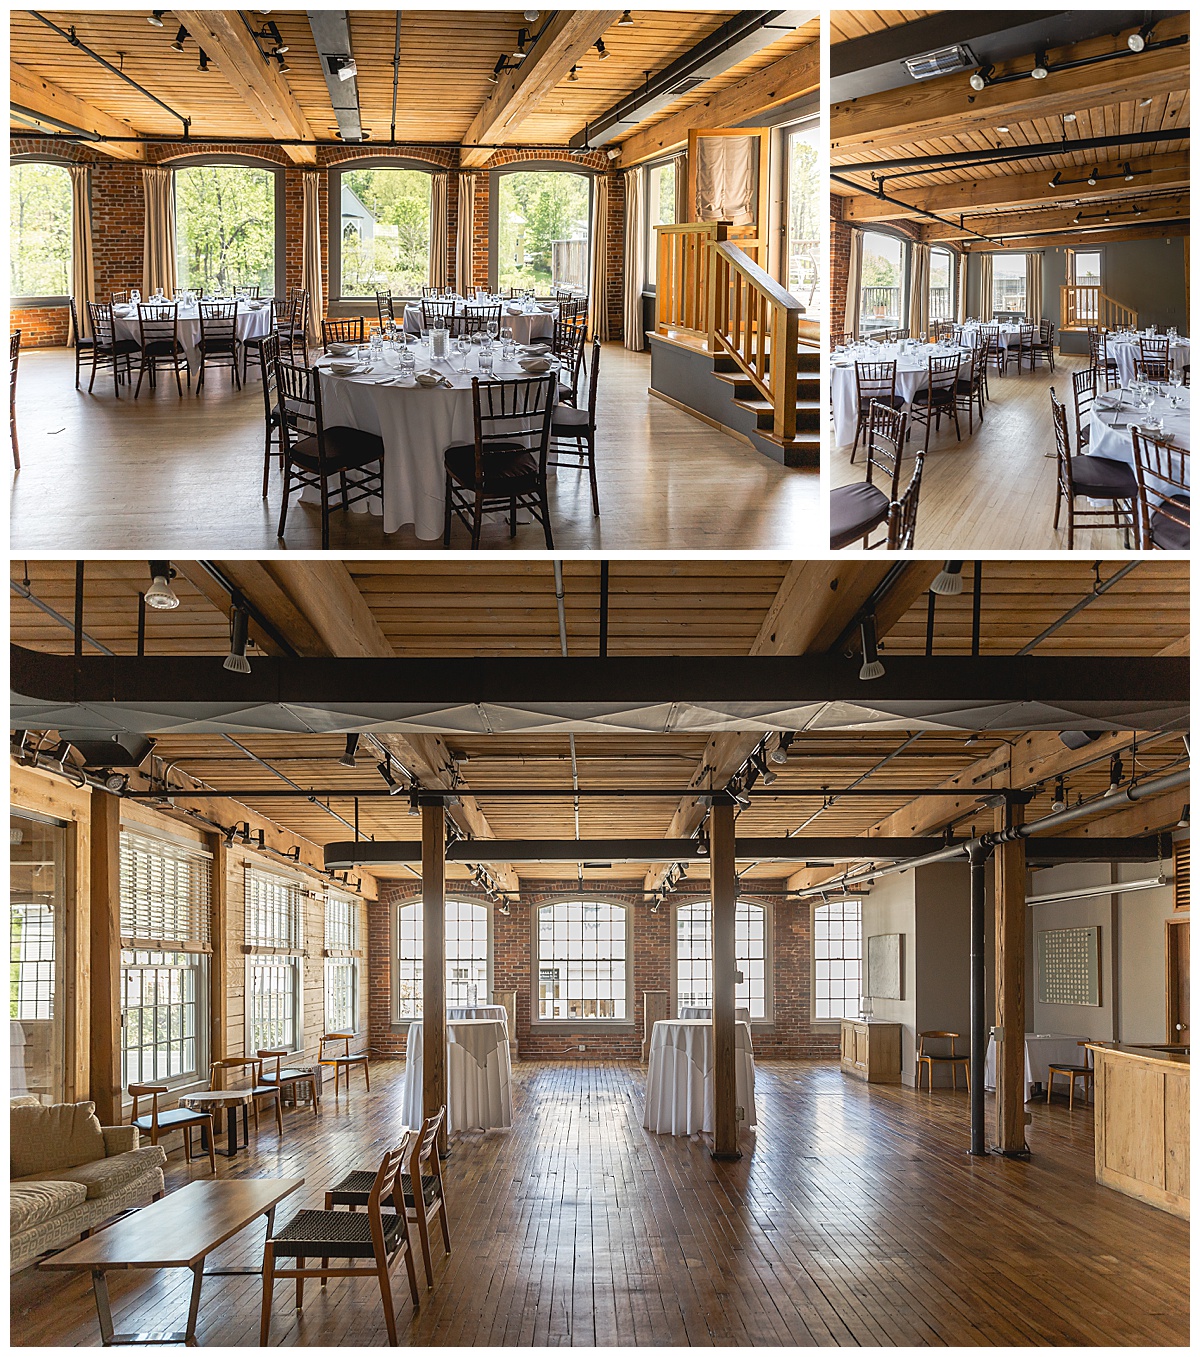 The Loft at Simon Pearce in Quechee Vermont features exposed beam ceilings and rustic brick walls, giving the space an industrious feel. 